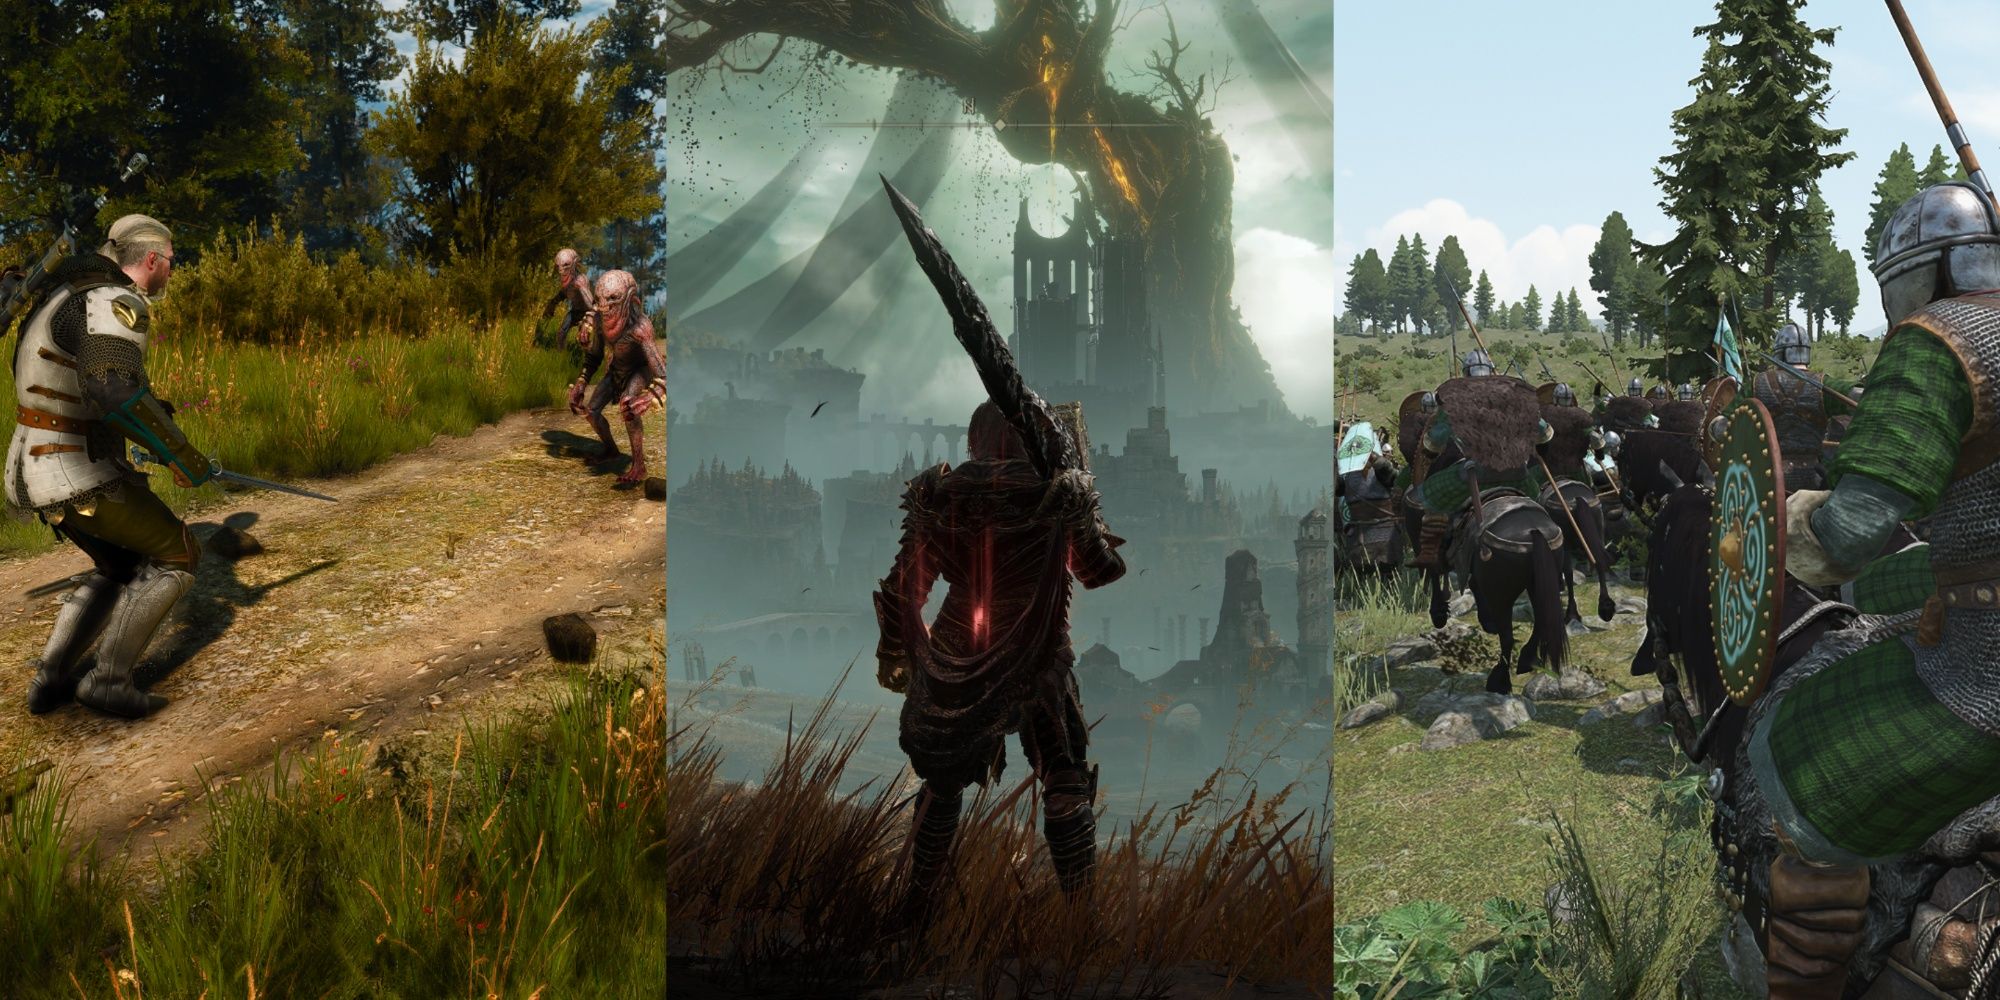 The Witcher 3, Elden Ring and Mount and Blade Bannerlord